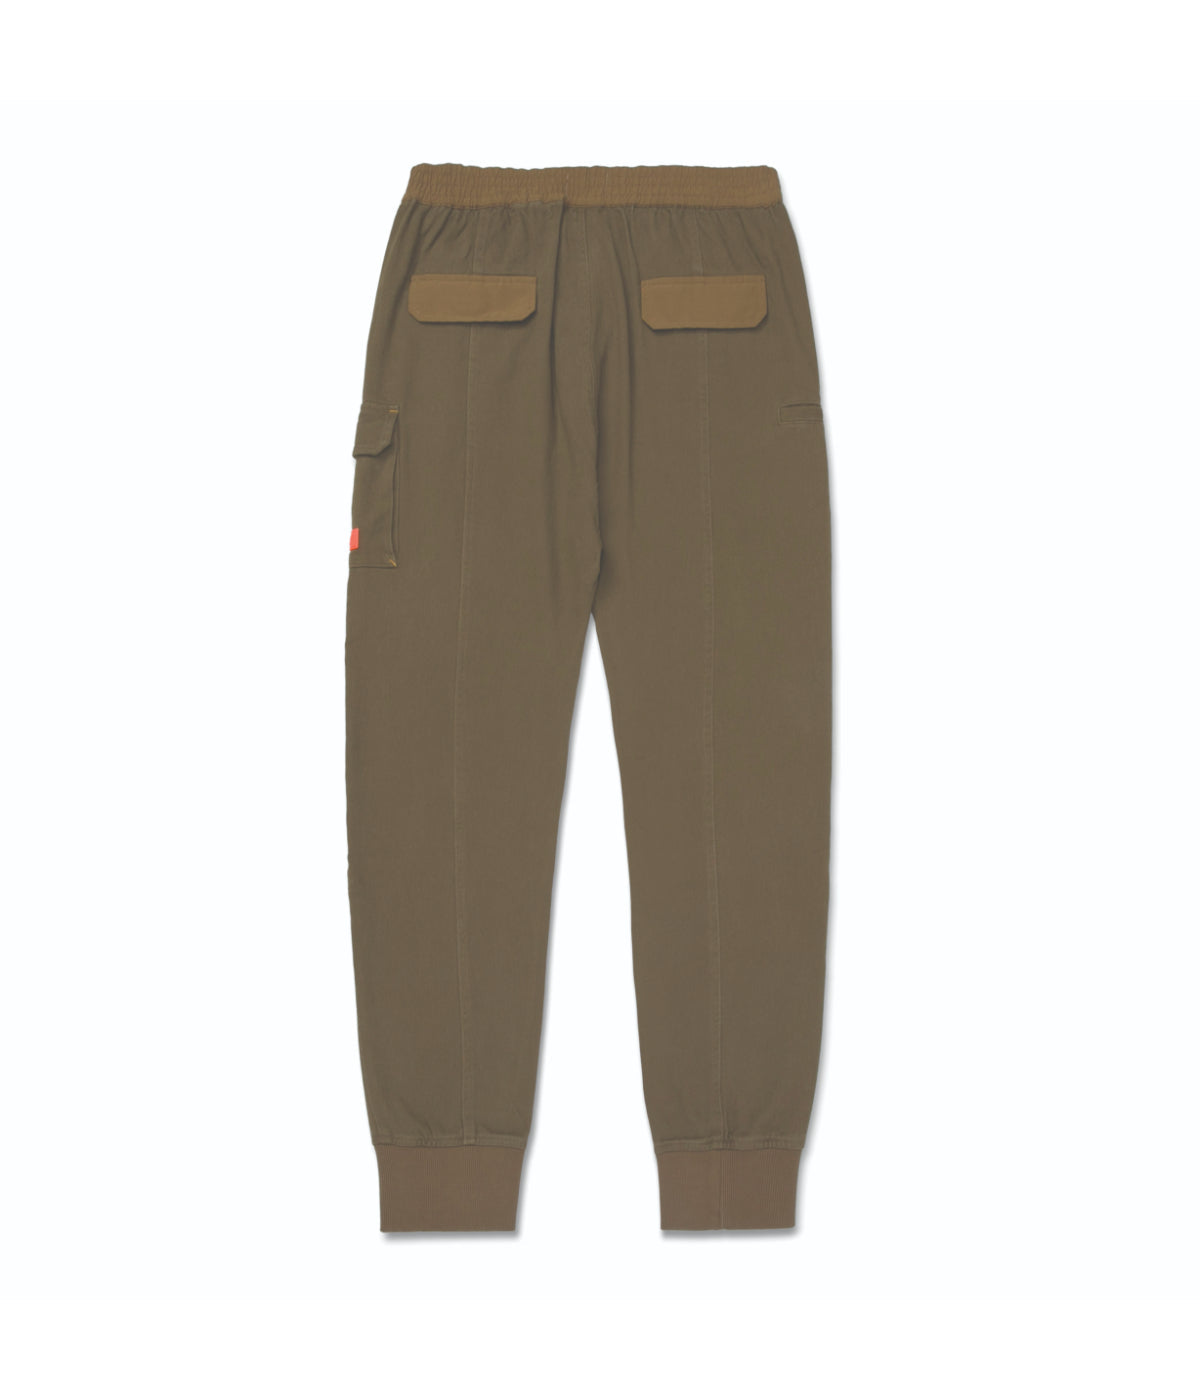 Operation Freeze Woven Cargo Jogger Military Olive